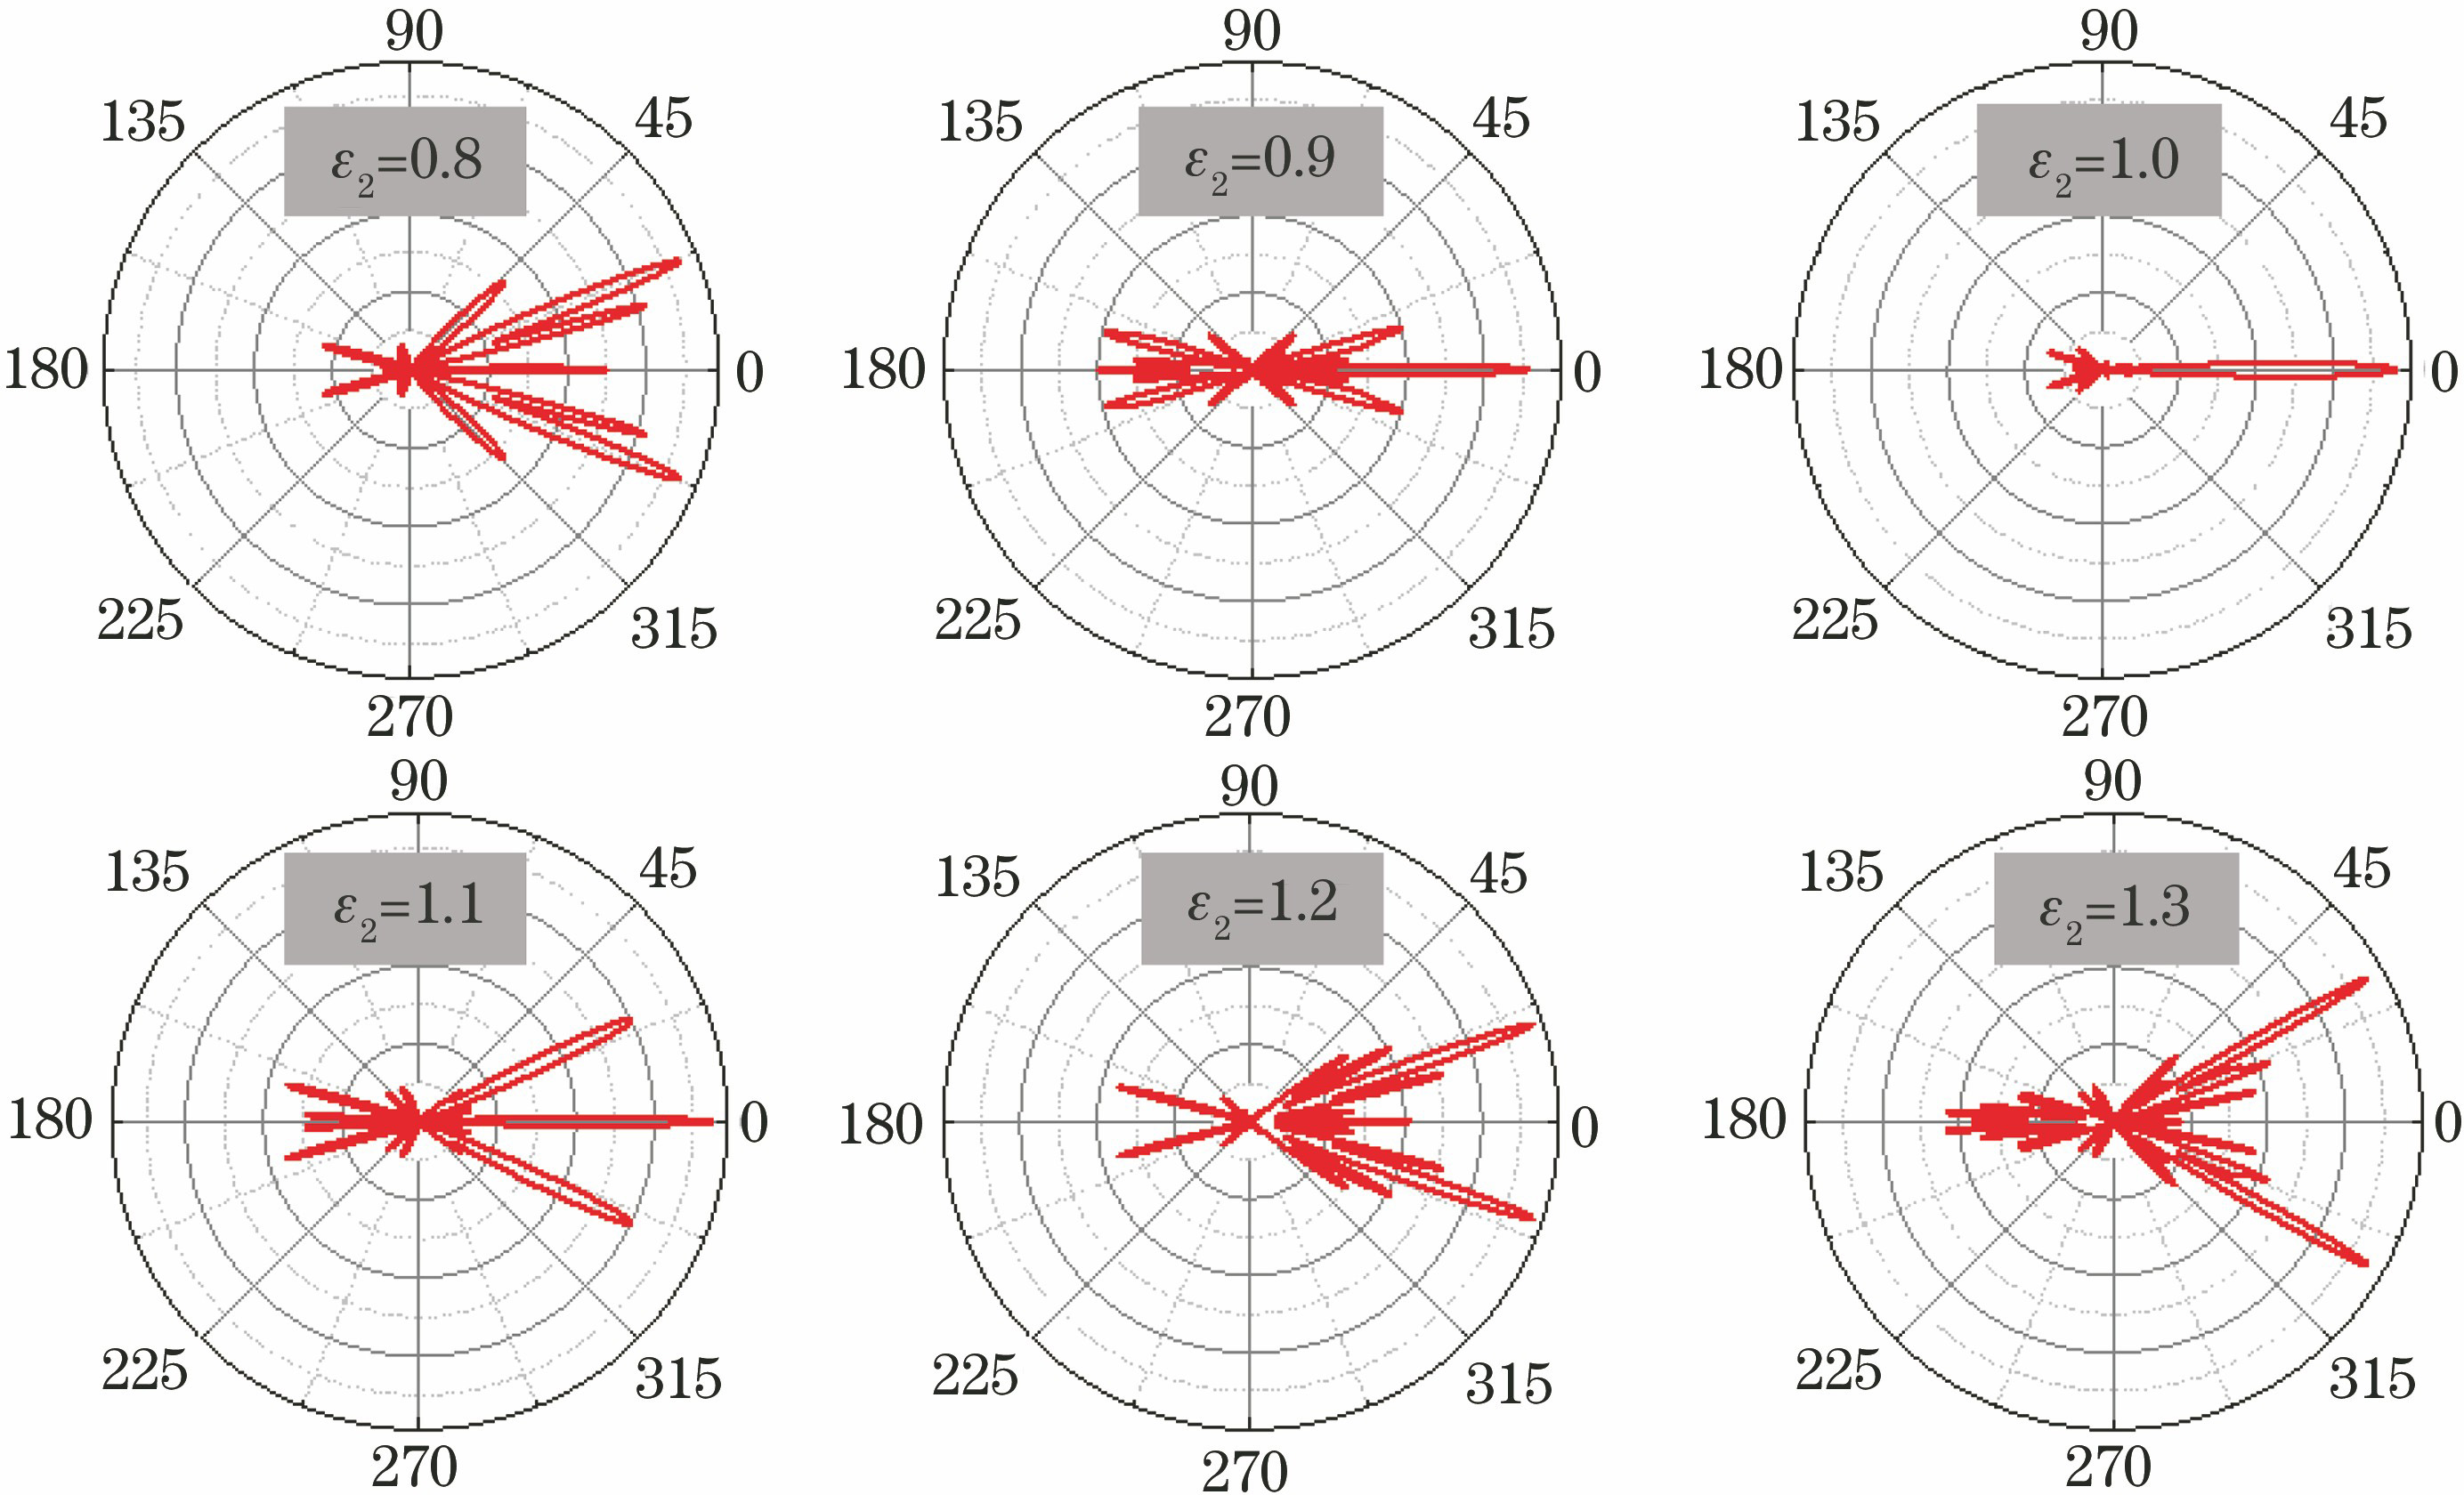 Far-field profiles of an oval microdisk under different deformation parameters ε2 of the left elliptical microdisk